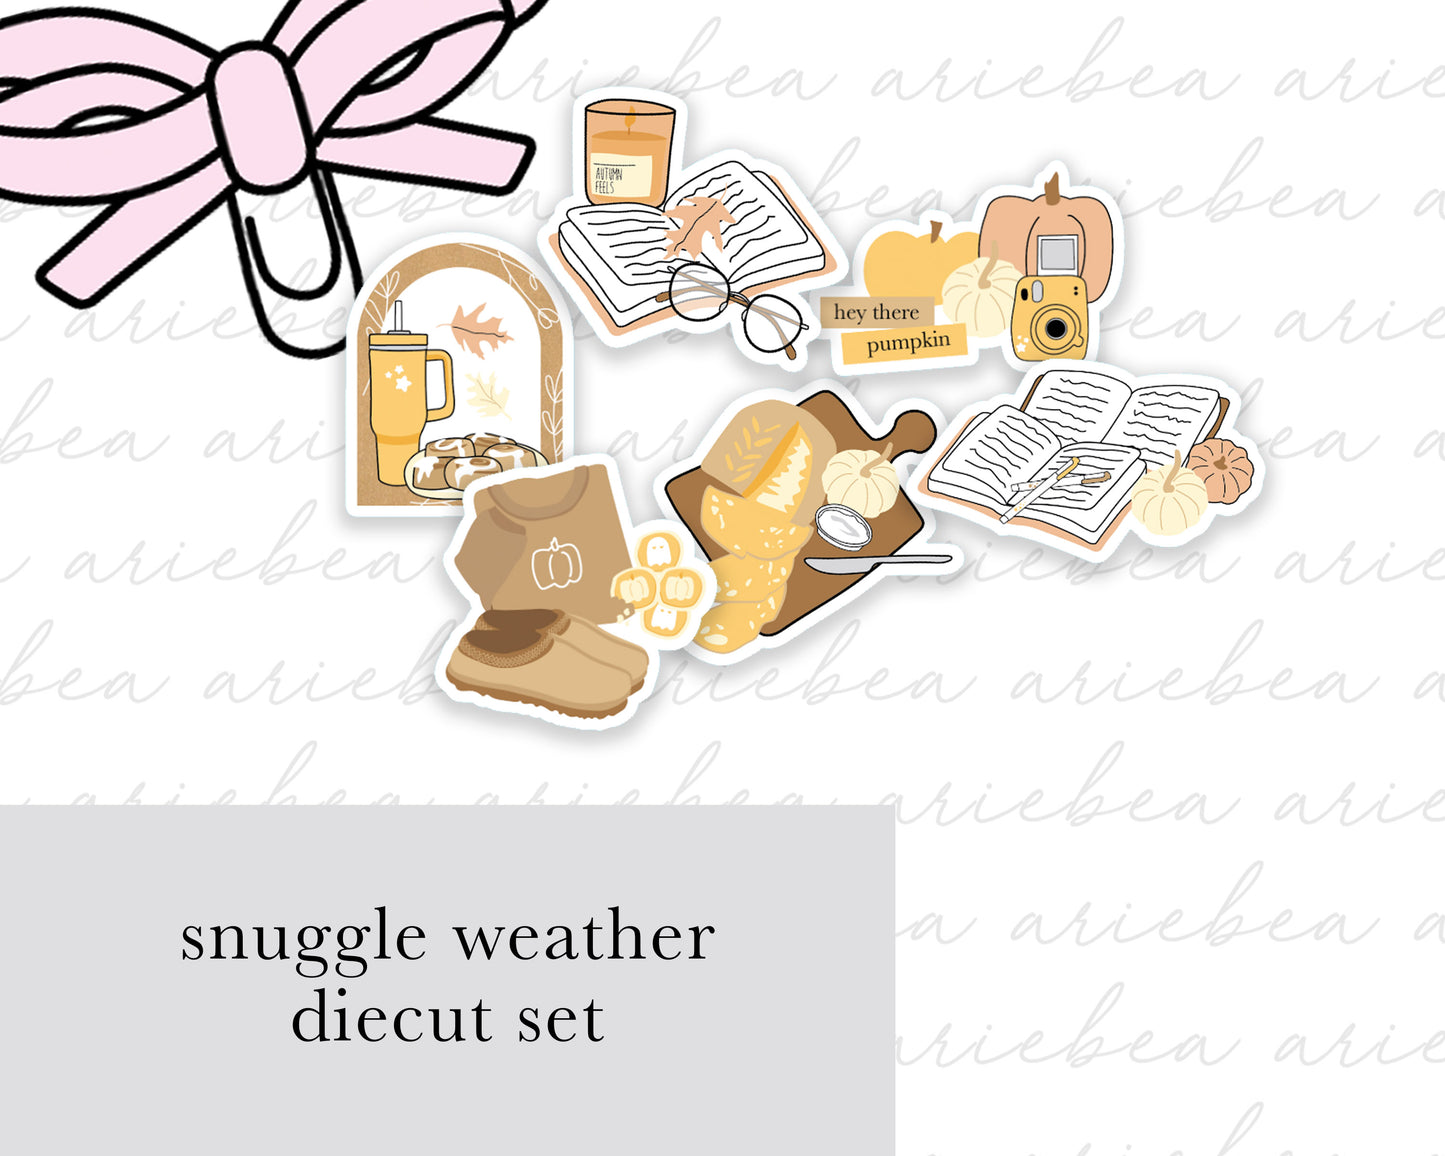 Snuggle Weather Collection Diecut set of 6